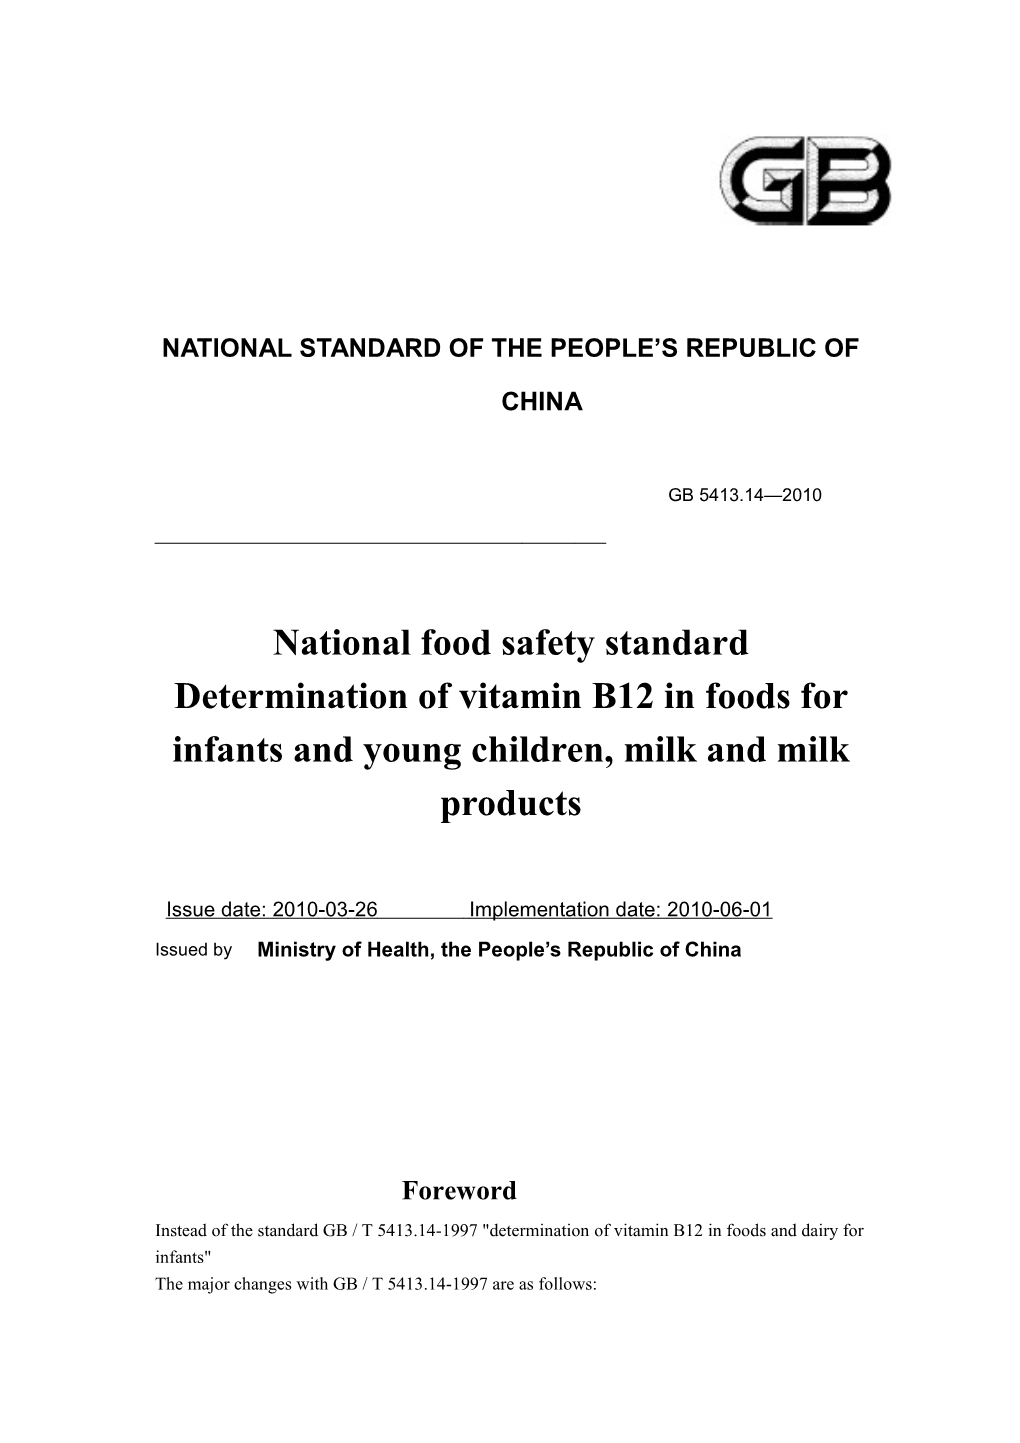 34 Determination of Vitamin B12 in Foods for Infants and Young Children, Raw Milk and Dairy